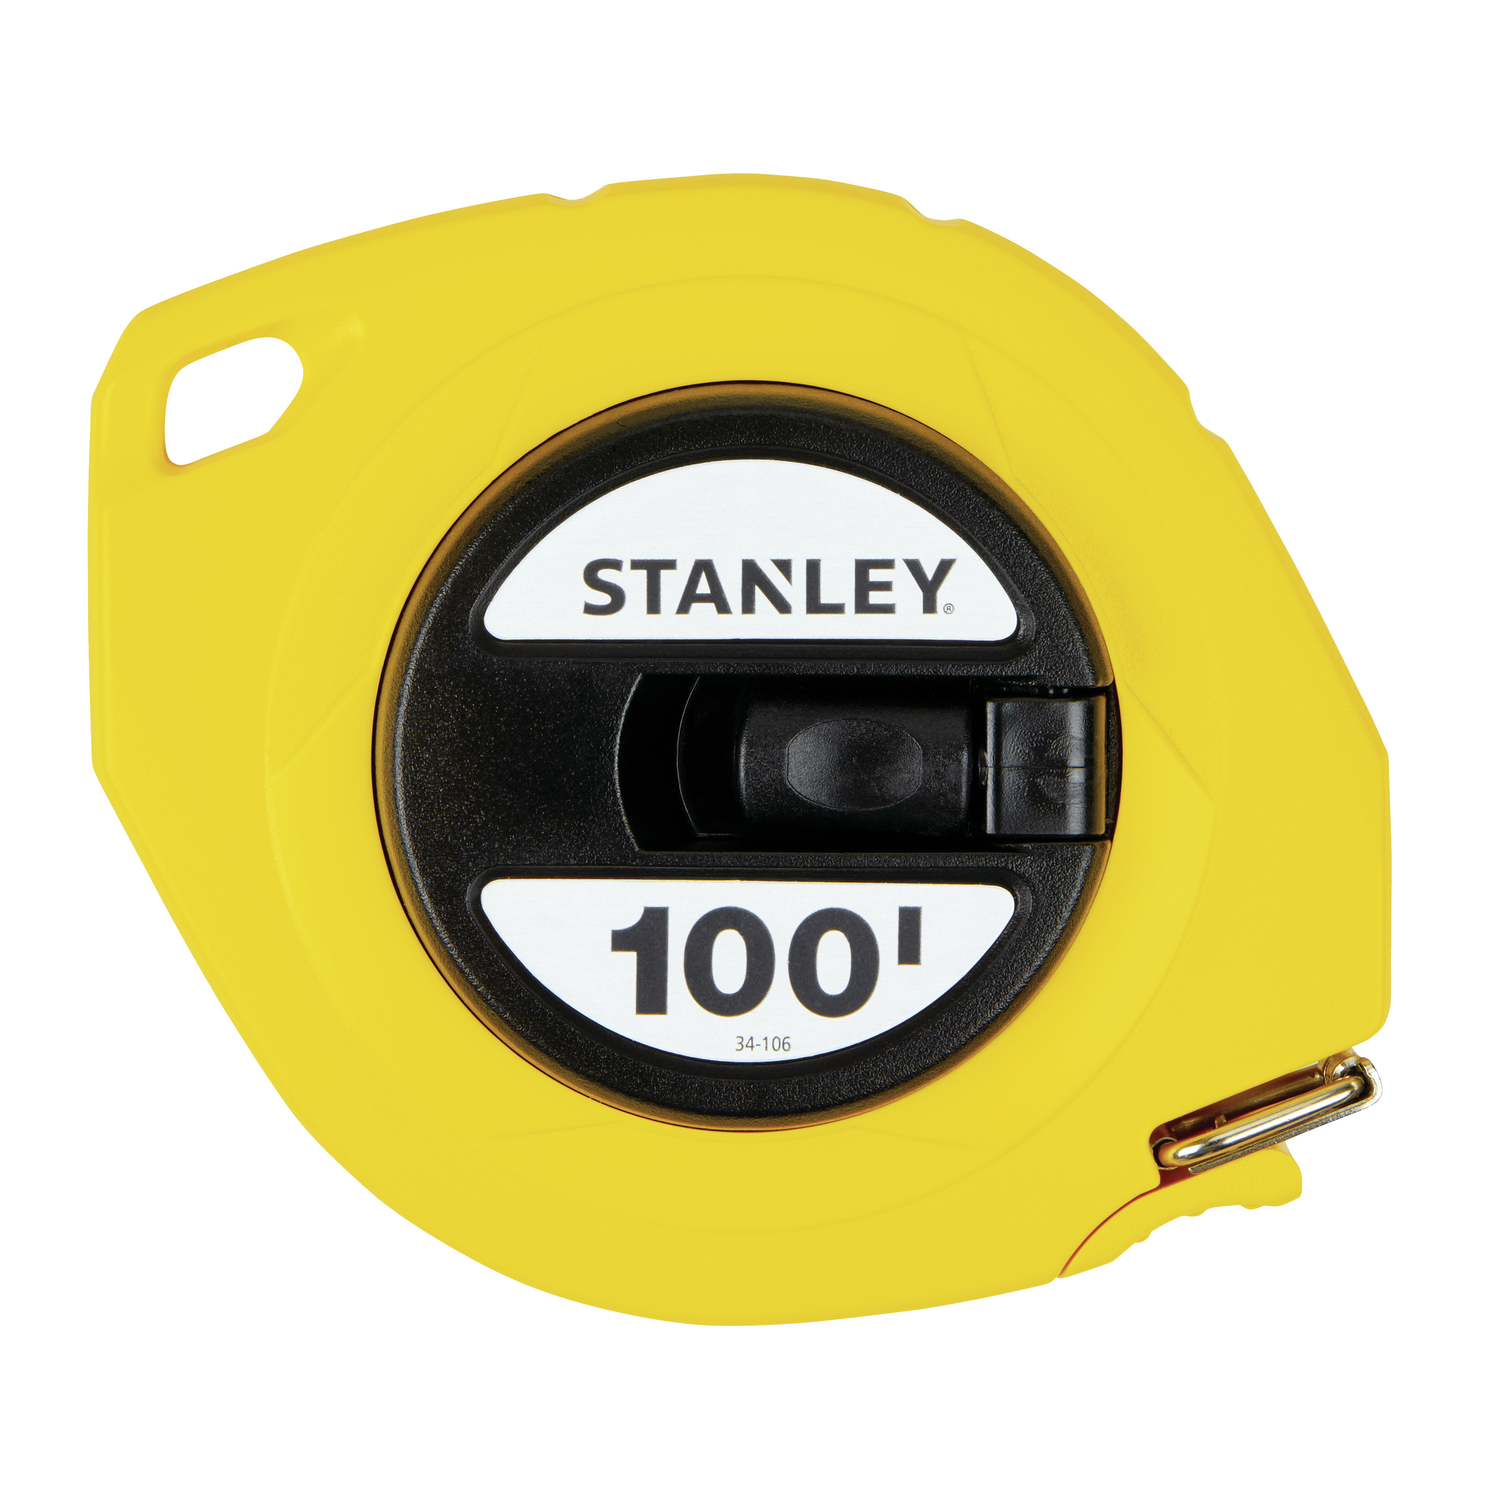 Photos - Tape Measure and Surveyor Tape Stanley 100 ft. L X 0.38 in. W Long Tape Measure 1 pk 34-106 